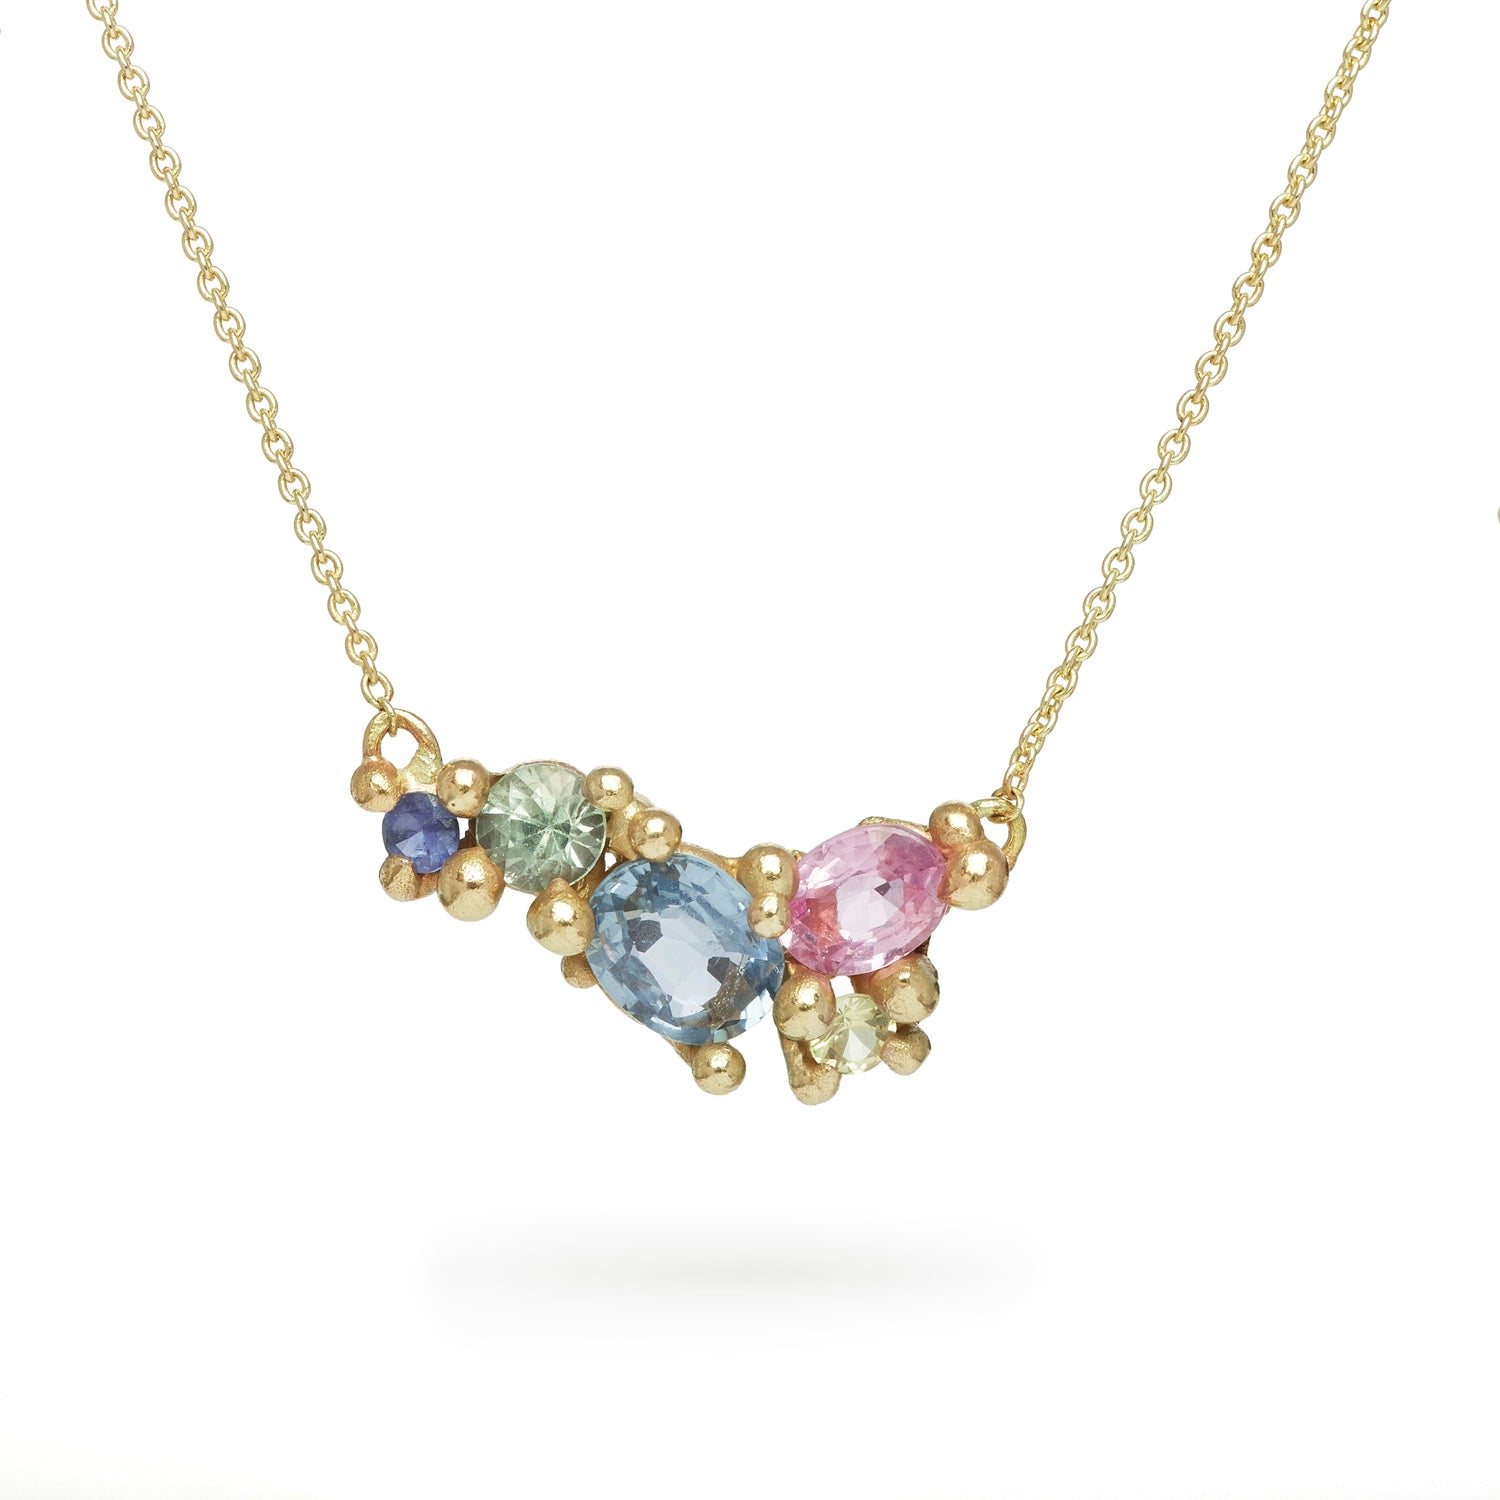 14ct yellow gold Ruth Tomlinson mixed pastel sapphire chain necklace with beaded granulation surround 